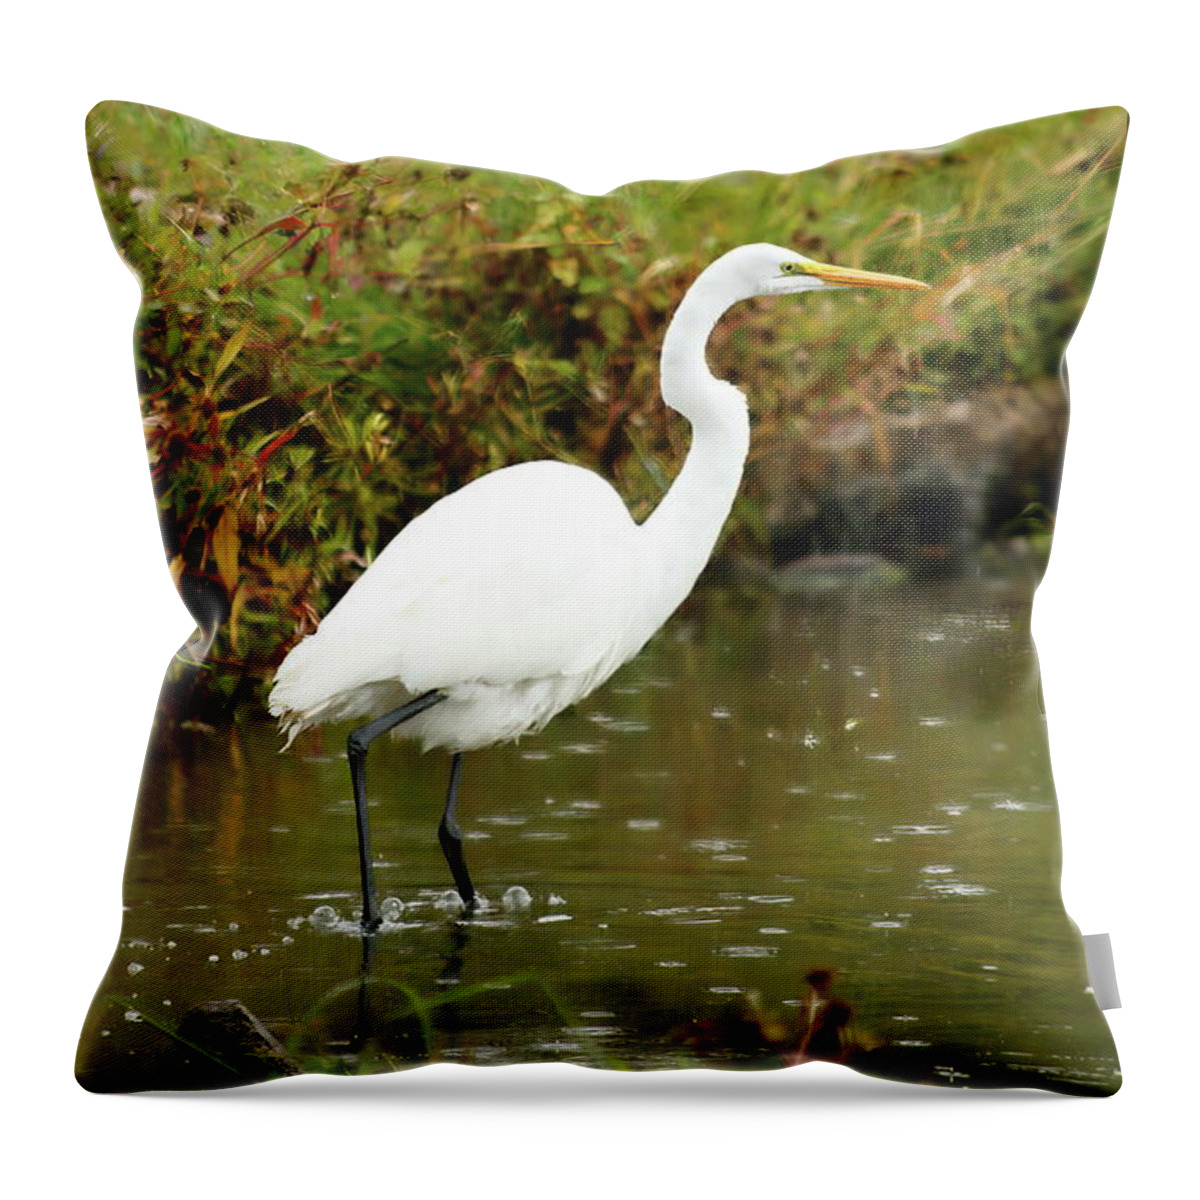 Animal Throw Pillow featuring the photograph White Egret by Lens Art Photography By Larry Trager